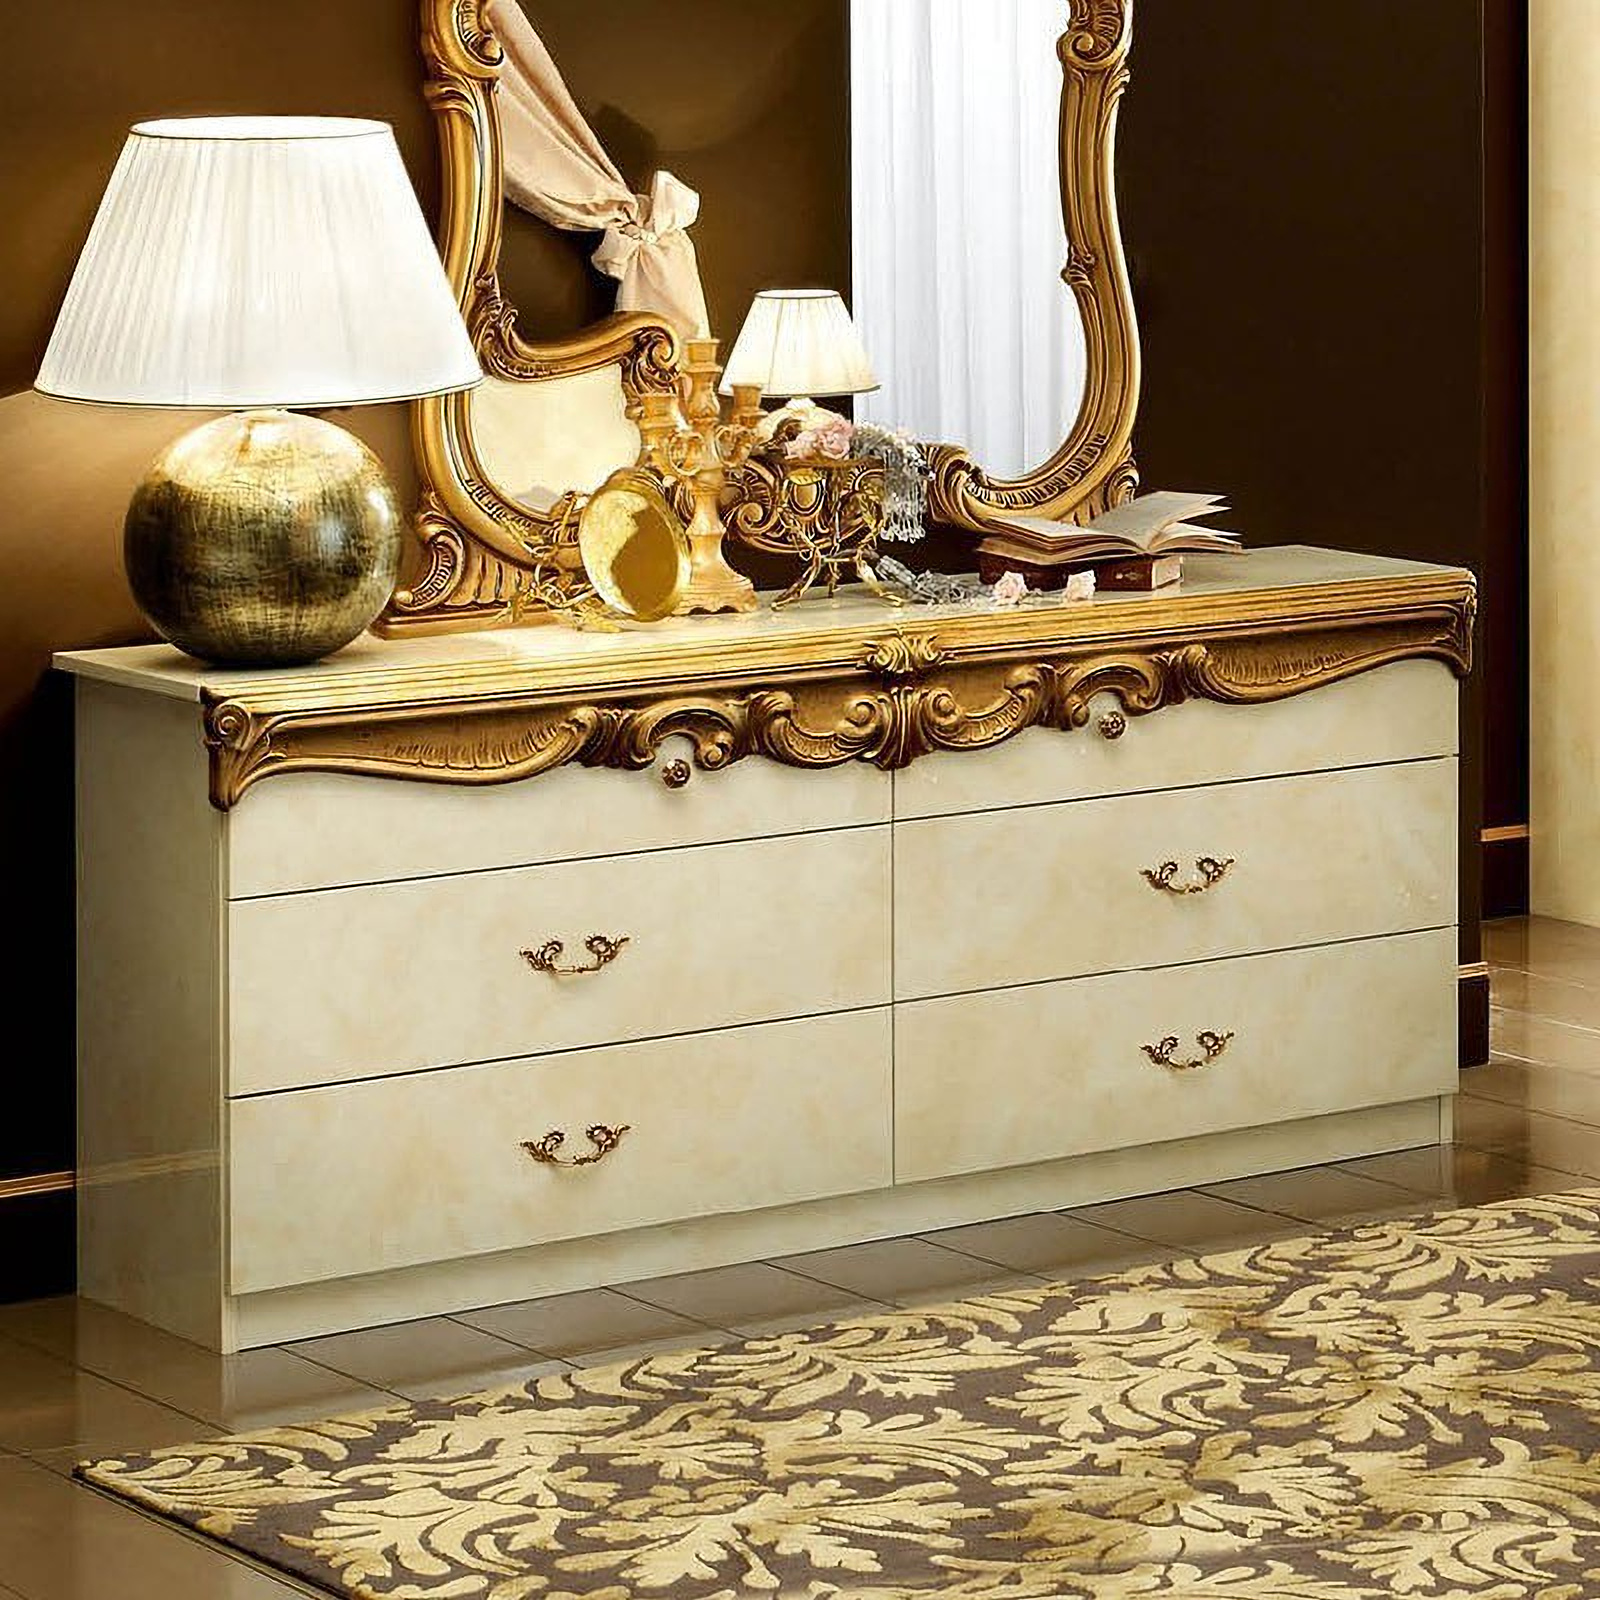 Barocco Bedroom Set Ivory And Gold